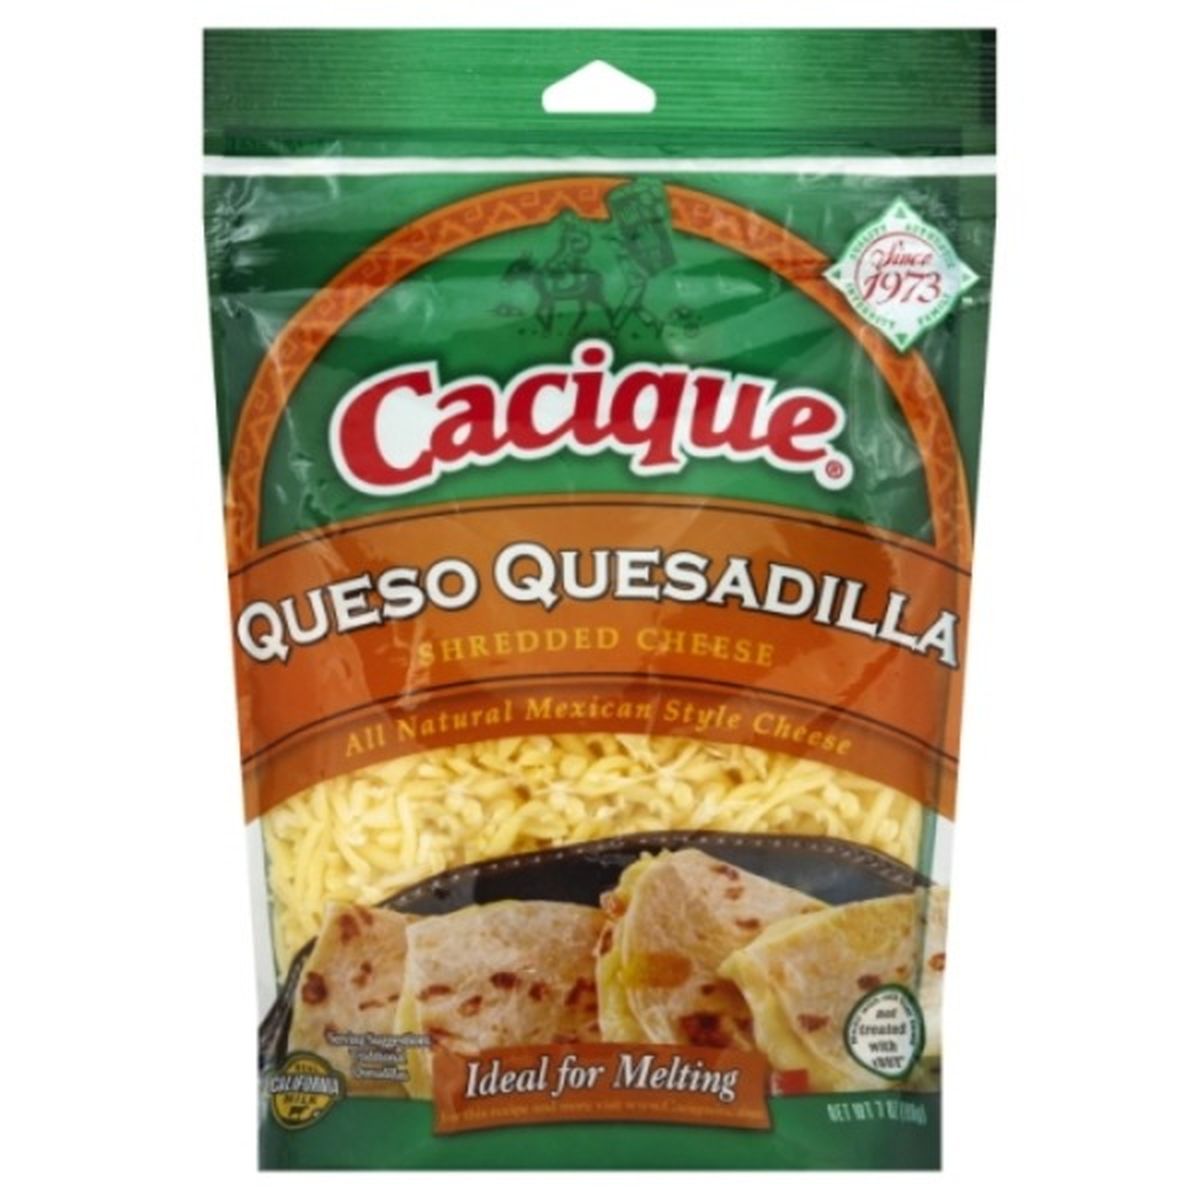 Calories in Cacique Cheese, Queso Quesadilla, Shredded